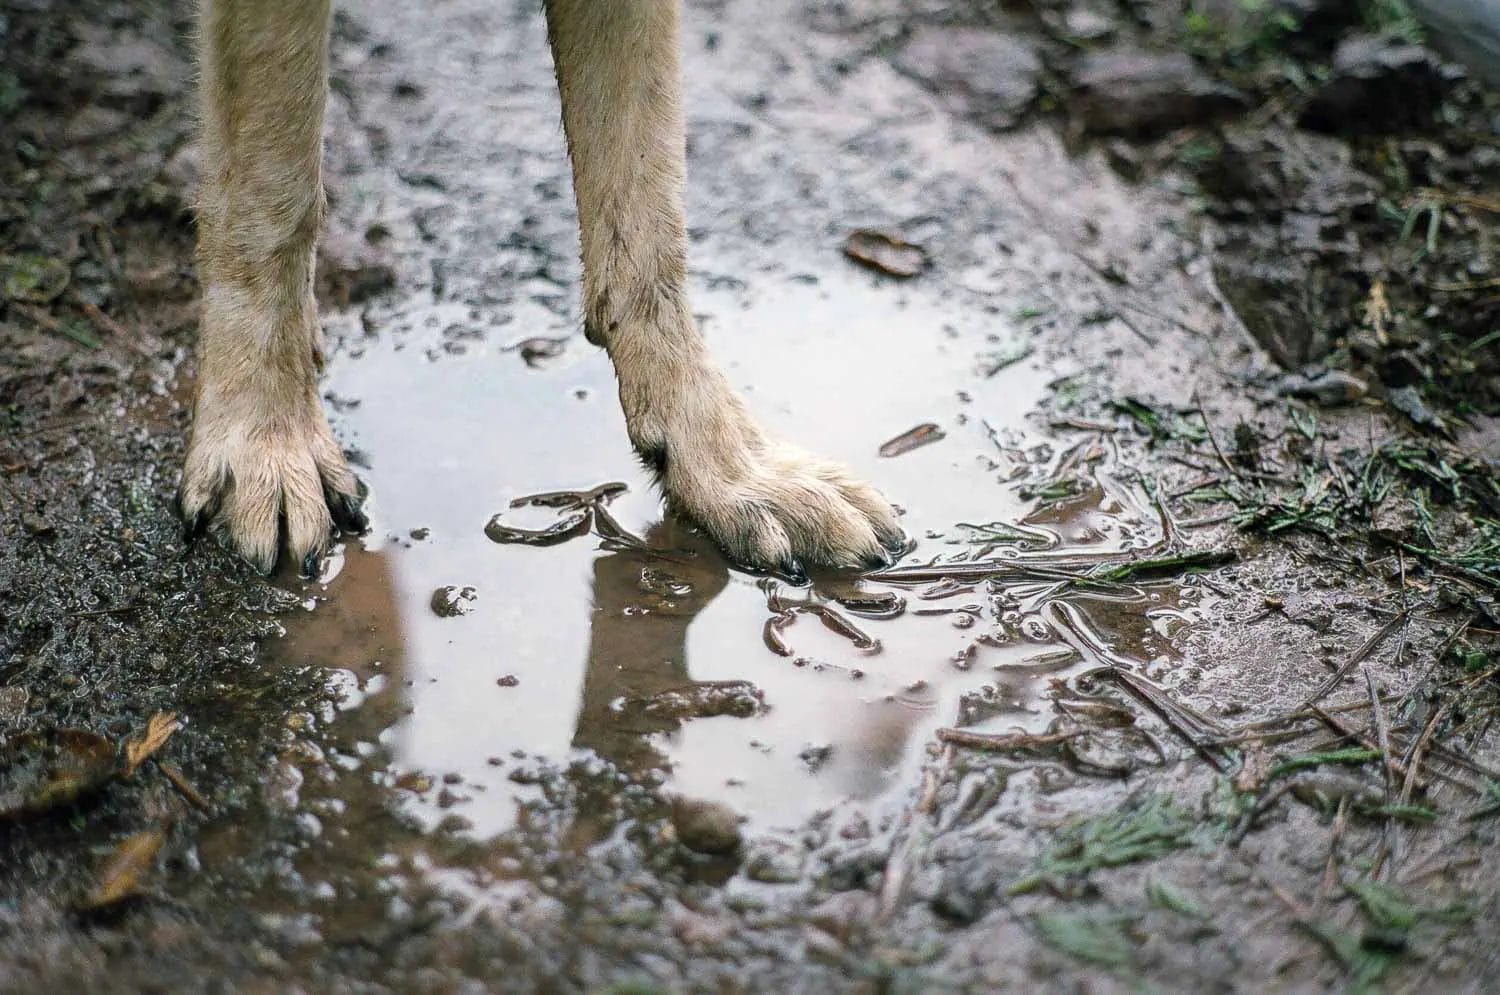 A dog's paws standing in a muddy puddle.